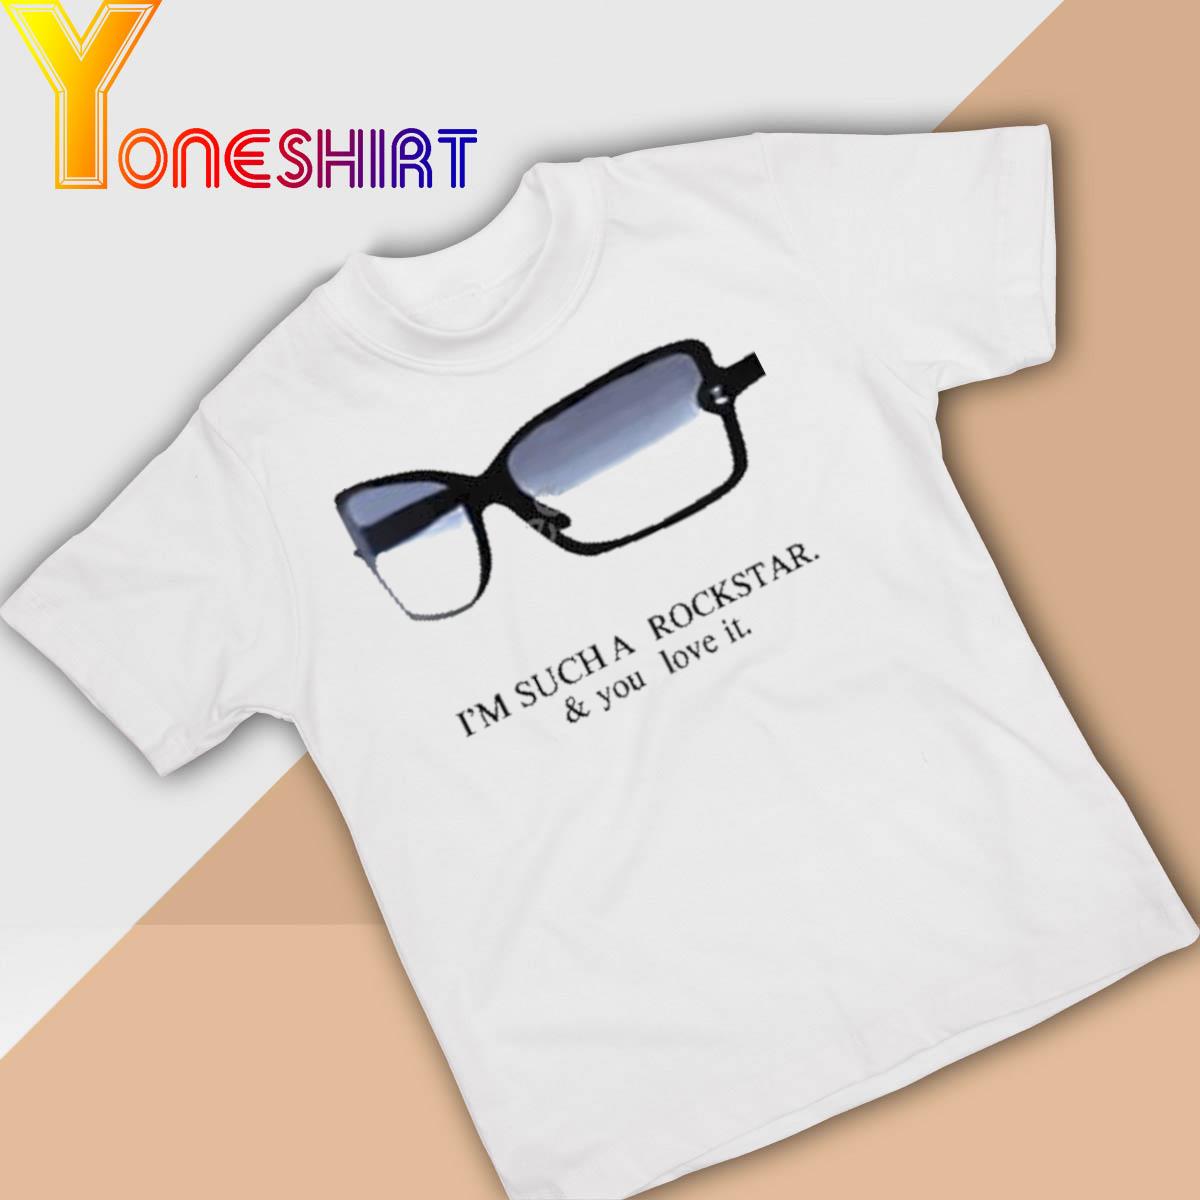 I’m Such A Rockstar And You Love It shirt